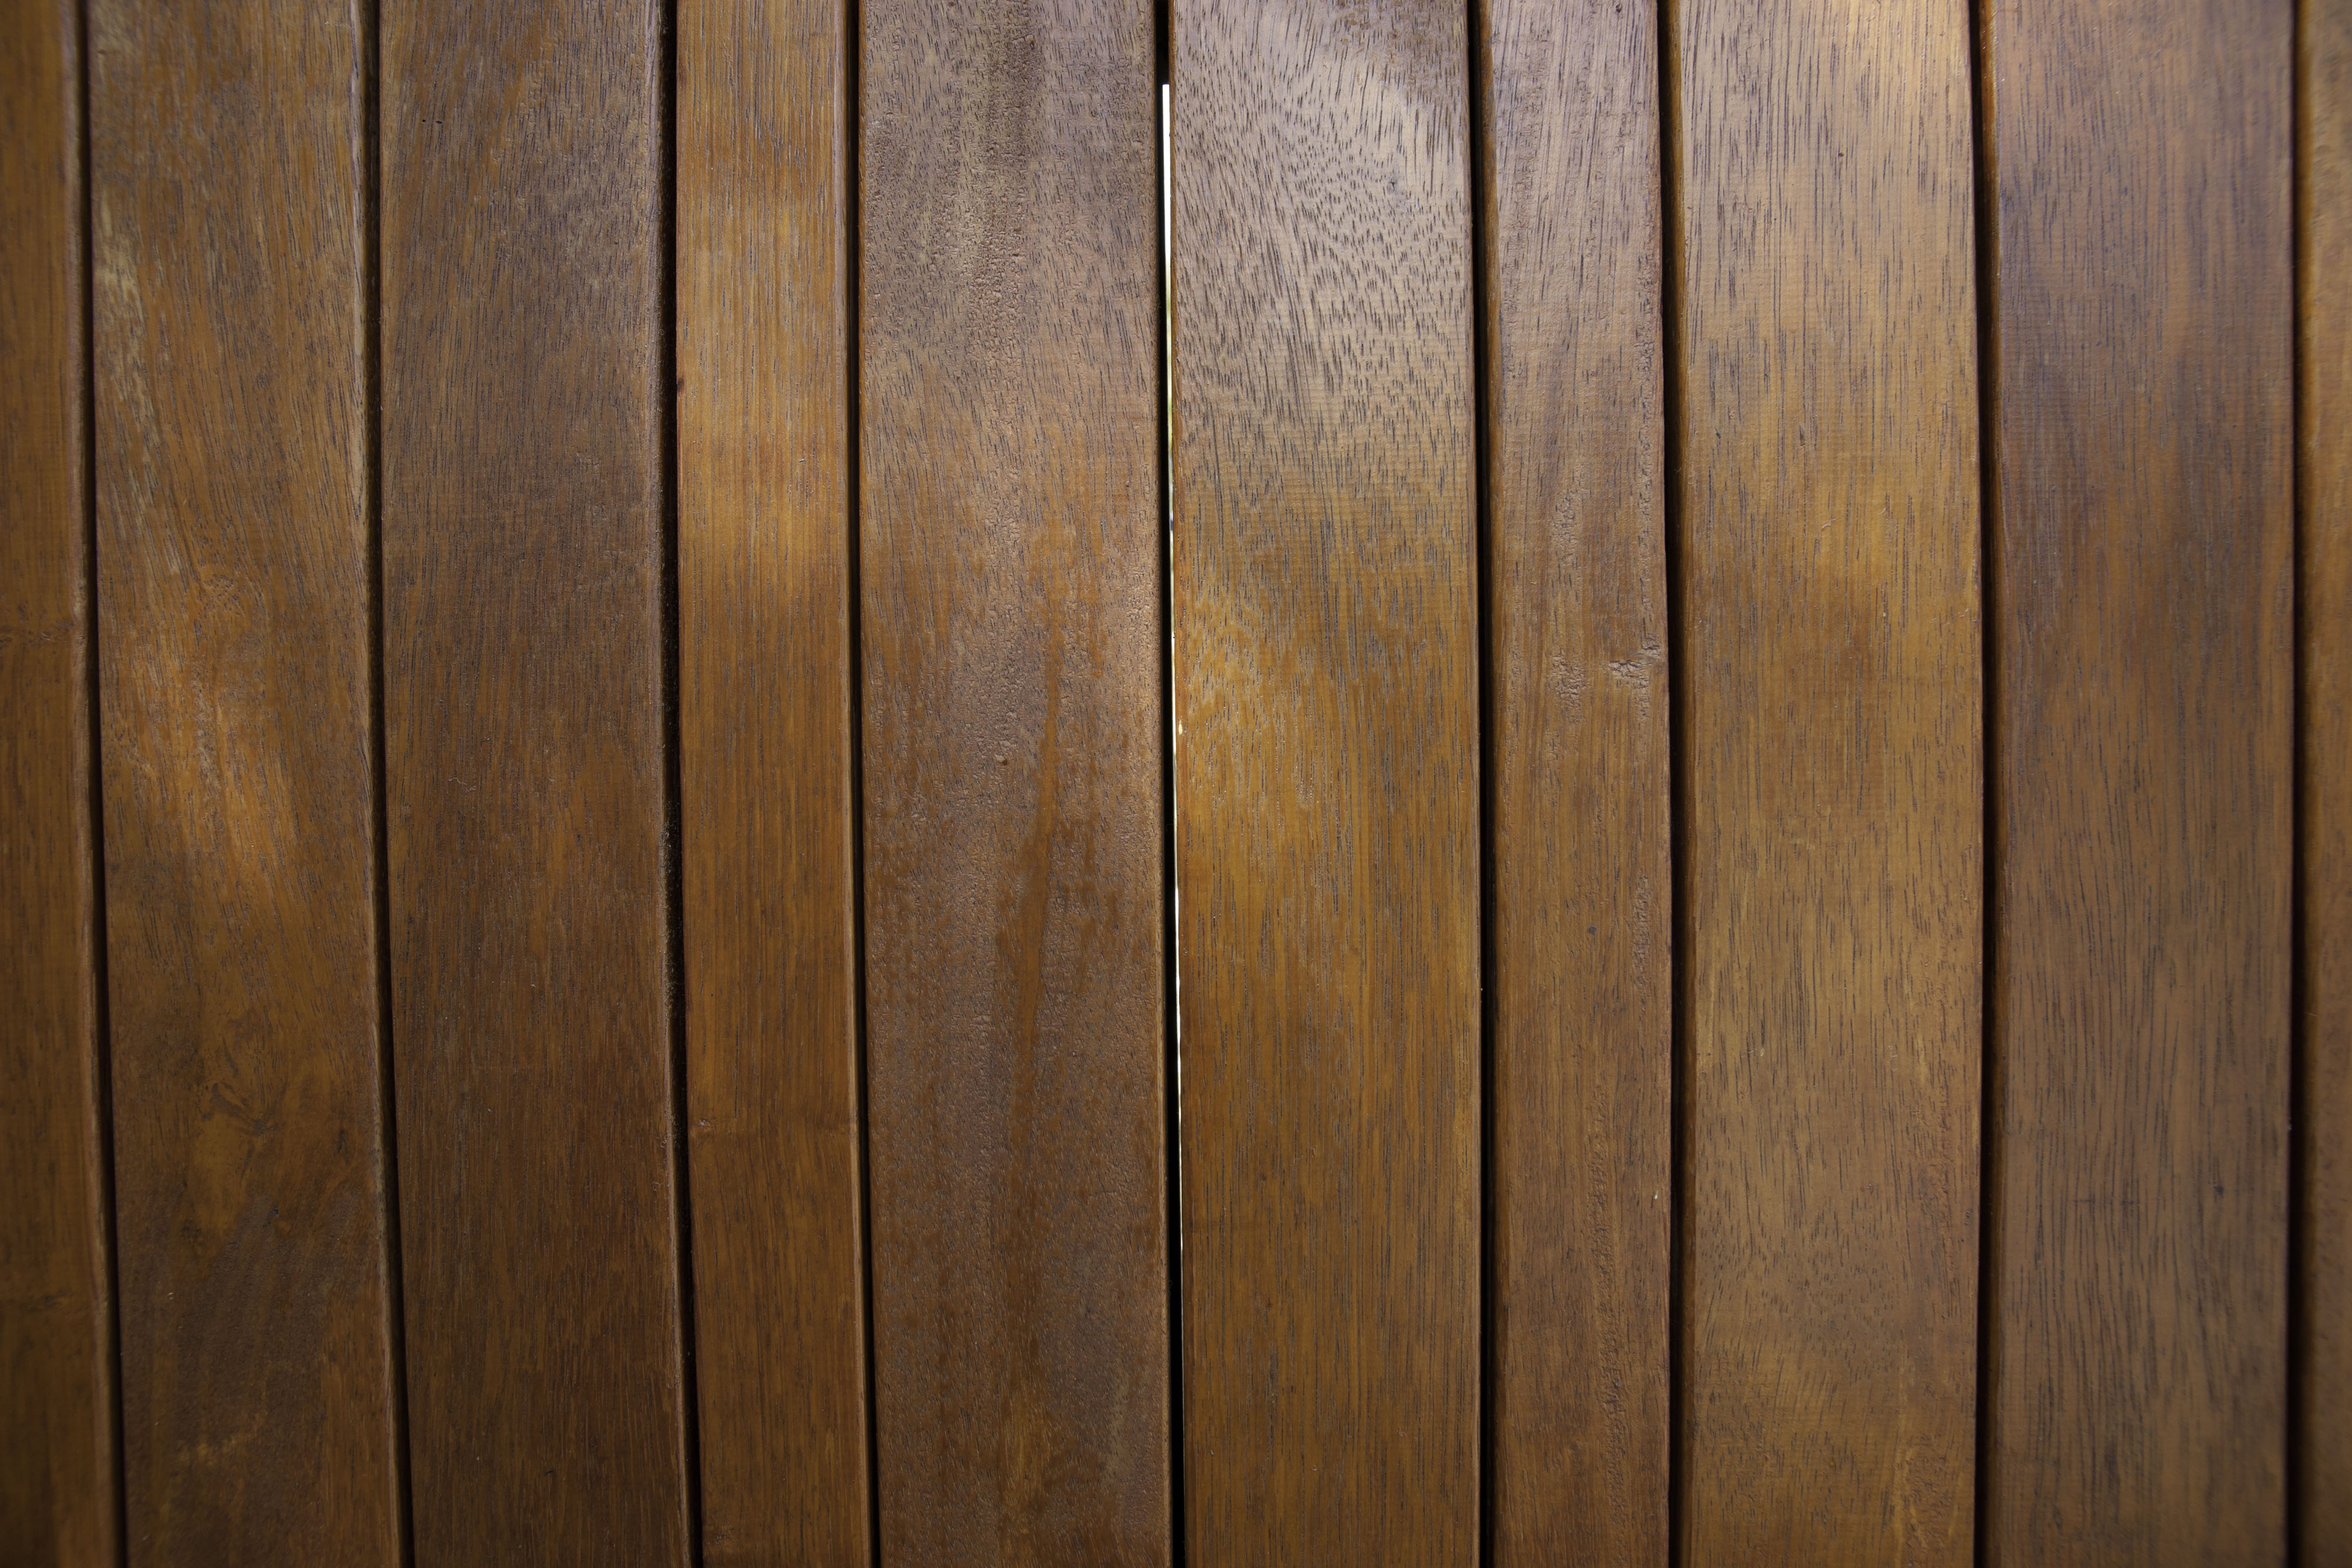 Wood Paneling Makeovers - How to Update Wood Paneling